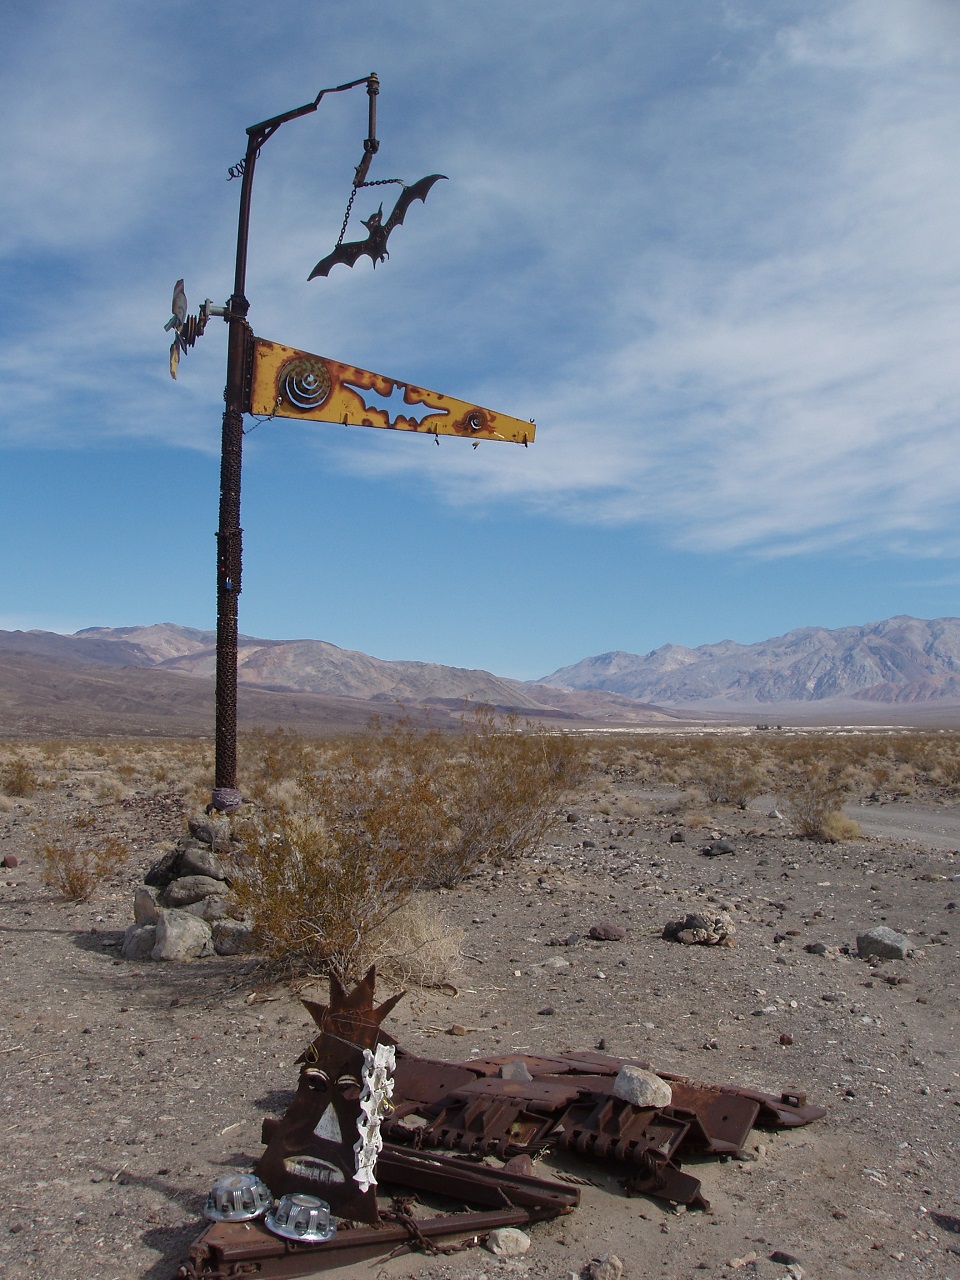 The Bat Pole is a welded metal sign that marks the road to Saline Valley Warm Springs.